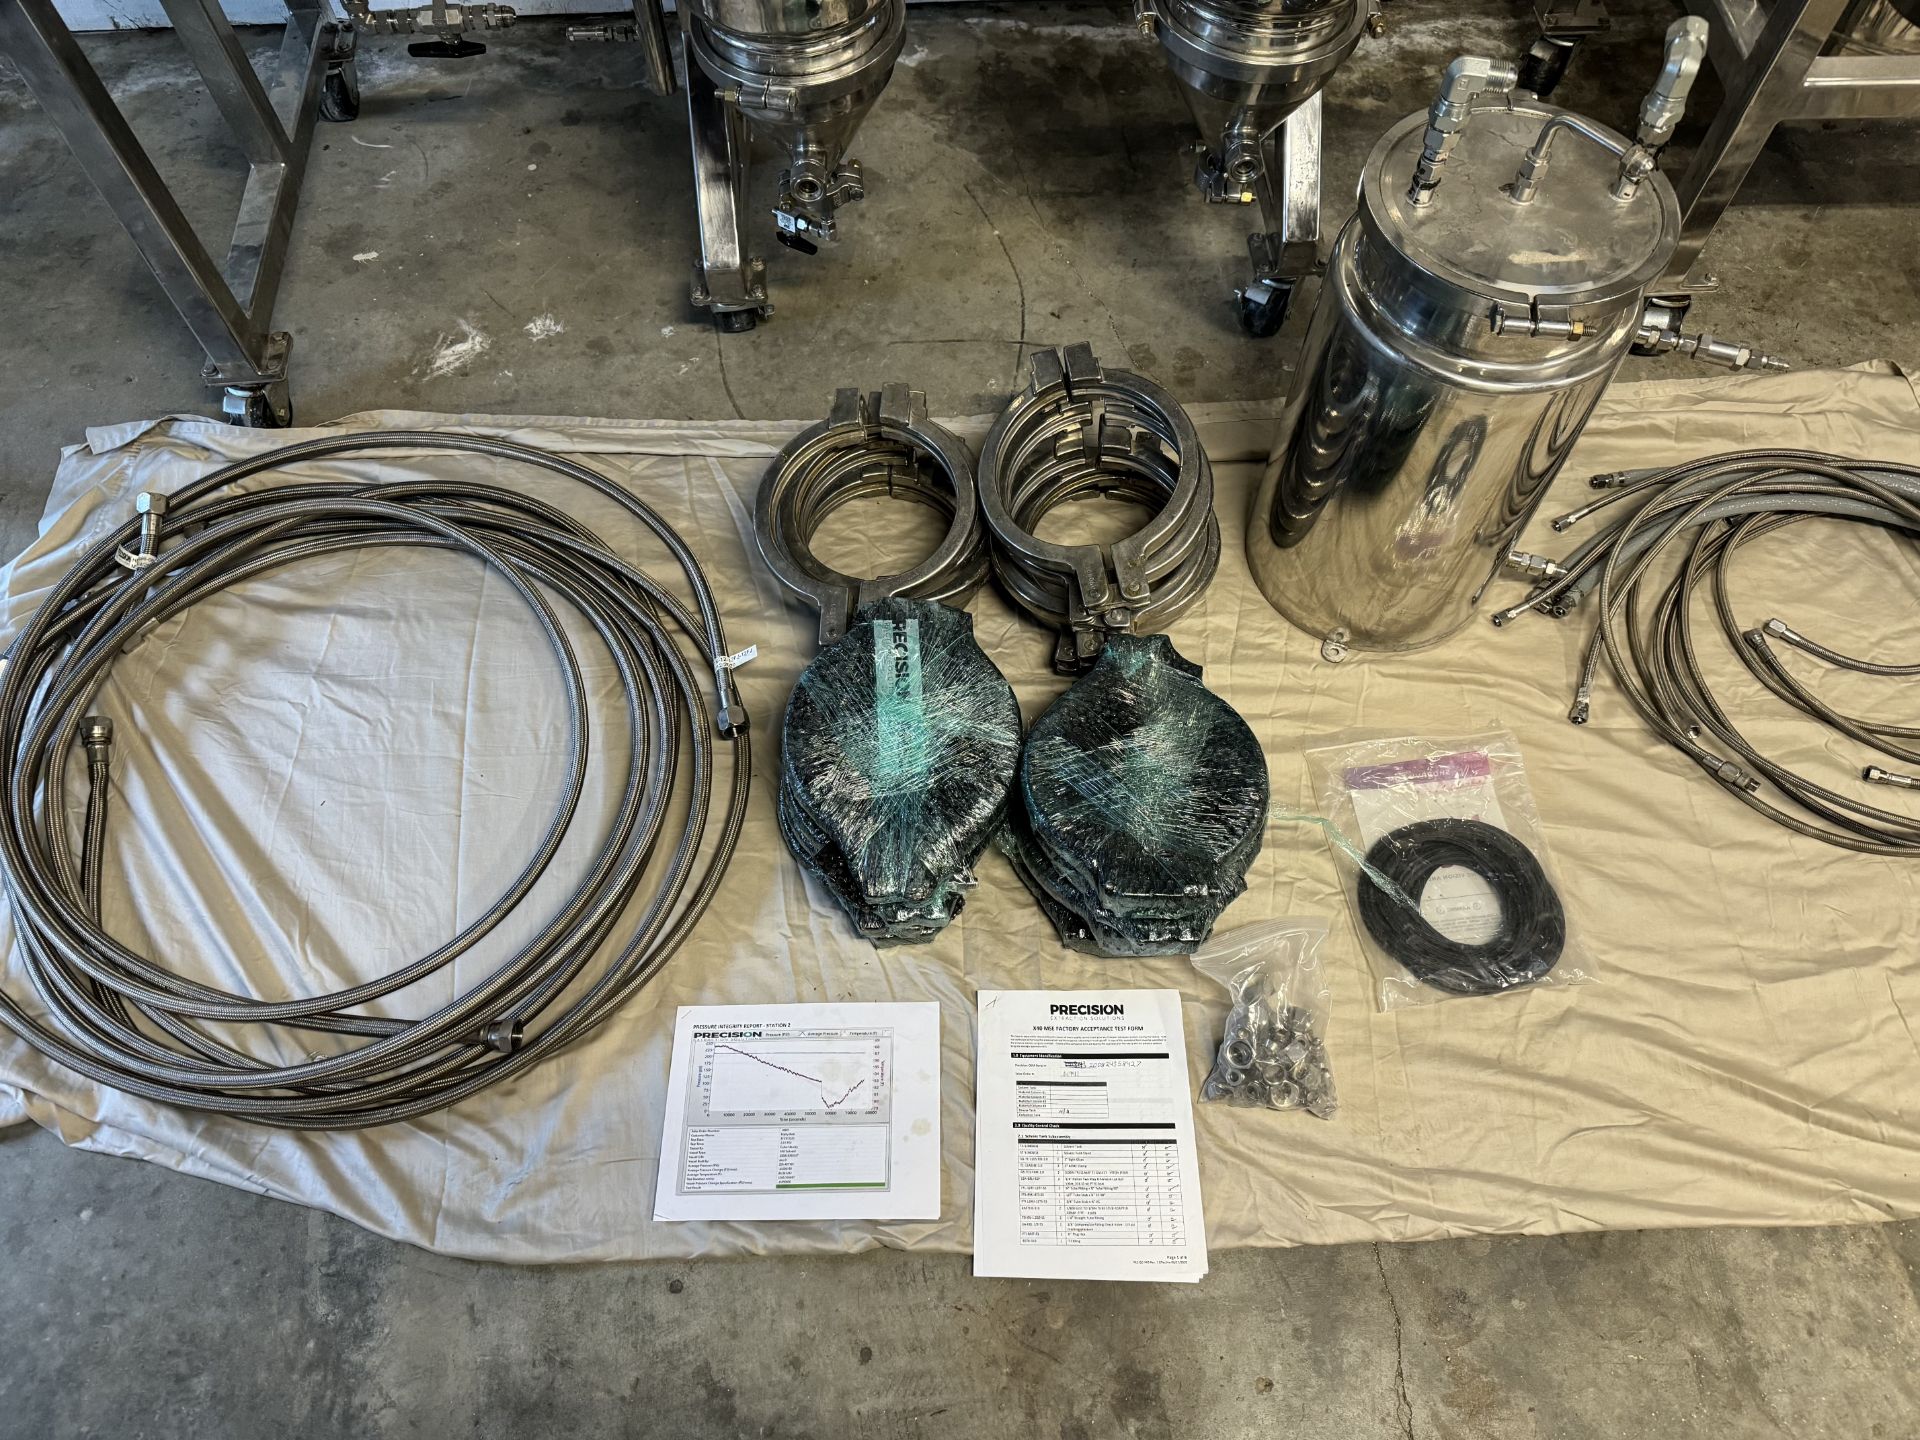 Used Precision Extraction Multi Solvent Closed Loop Extraction System. Model X40 MSE. - Image 3 of 9